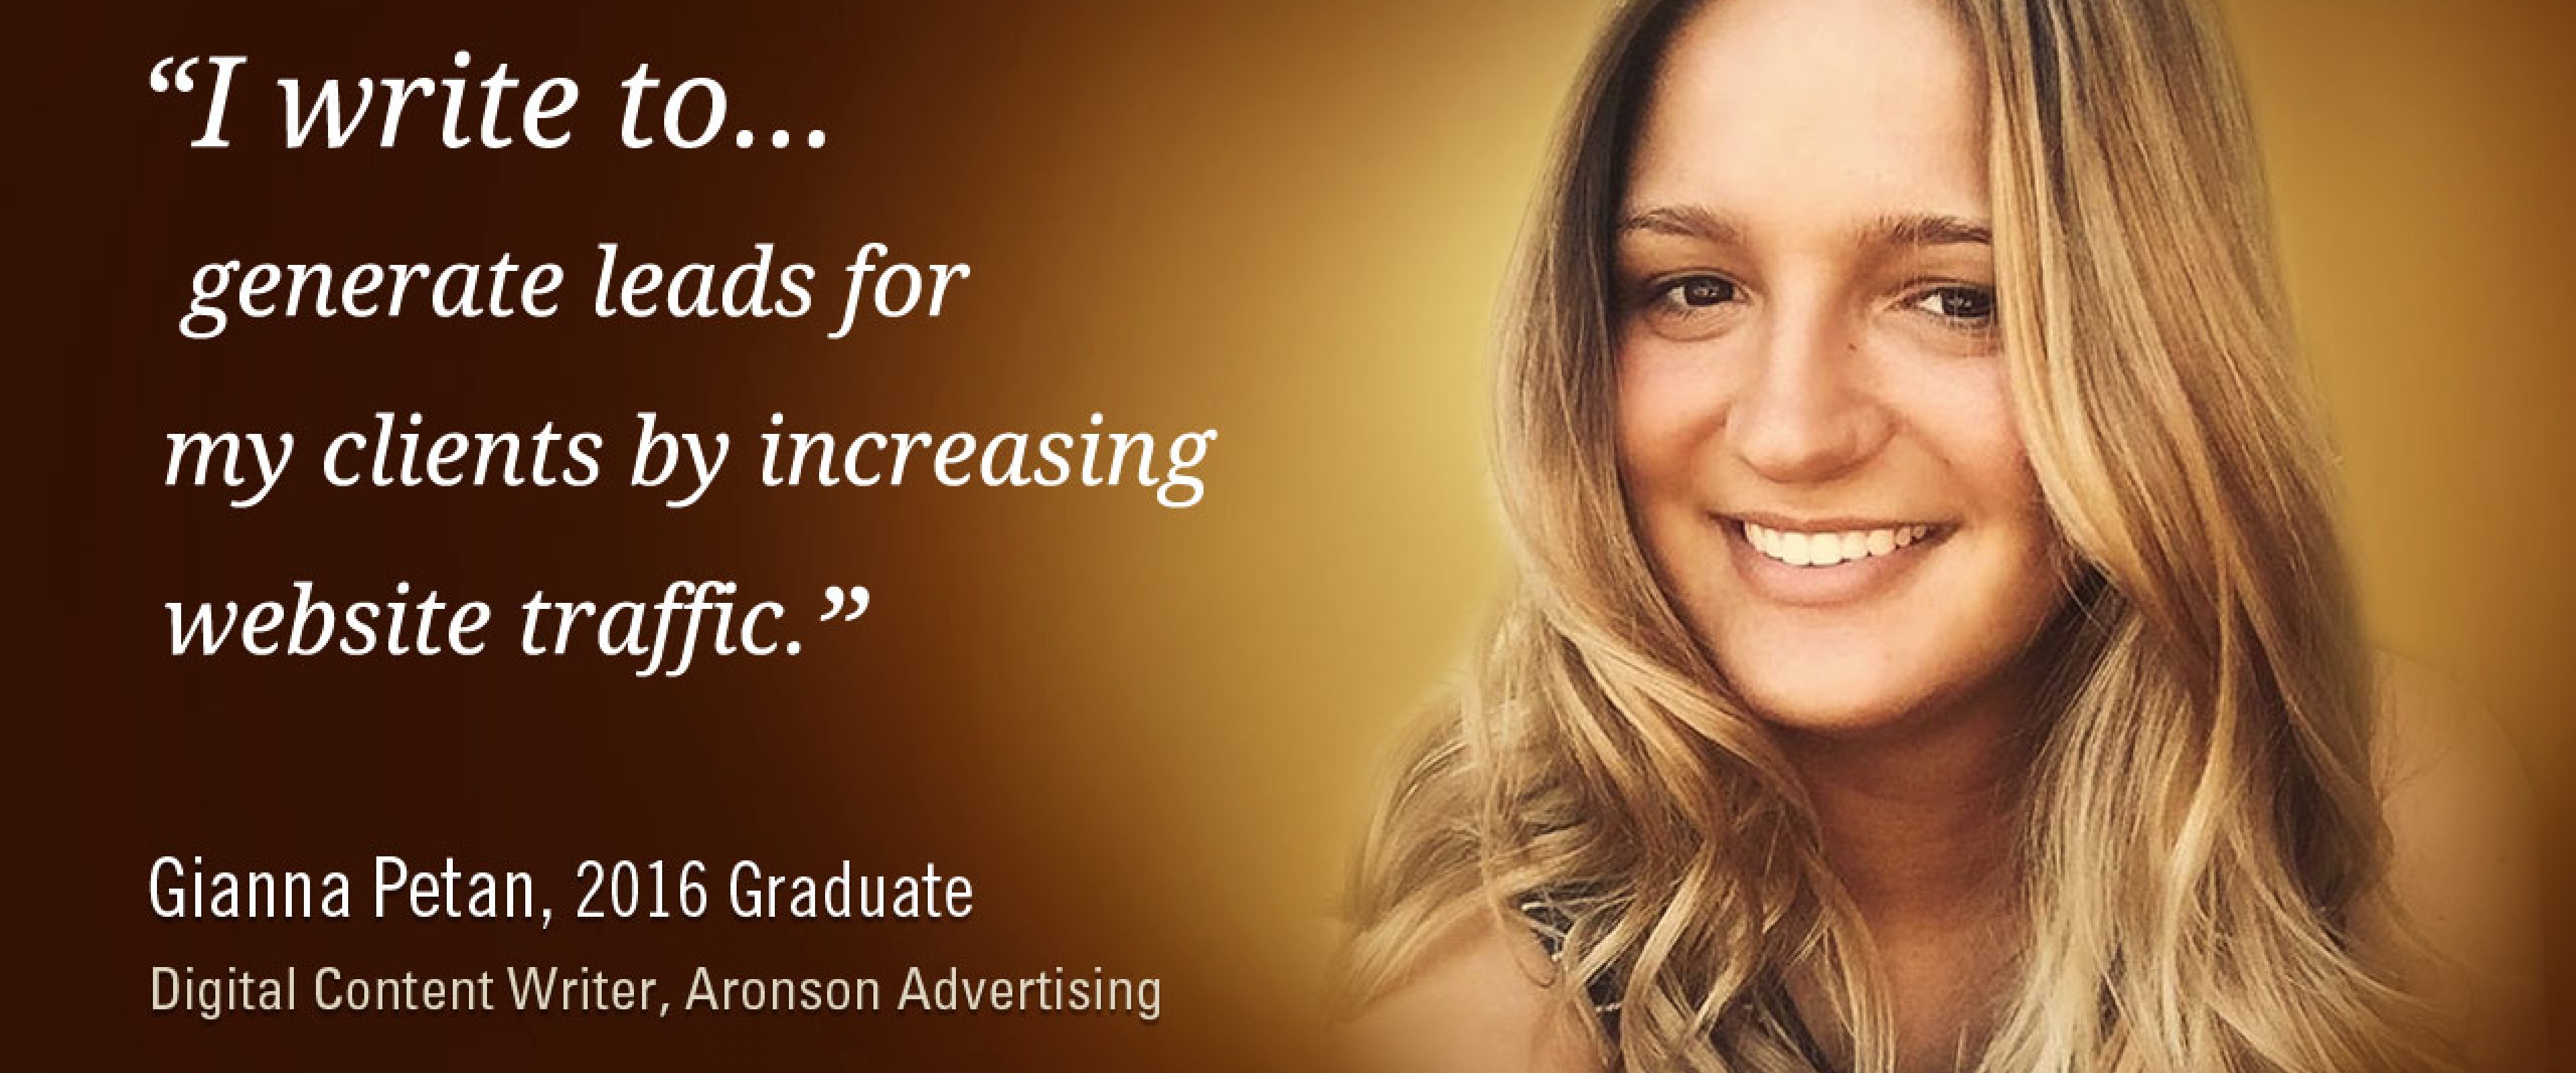 "I write to generate leads for my clients by increasing website traffic." -Gianna Petan, 2016 graduate, Digital Content Writer, Aronson Advertising